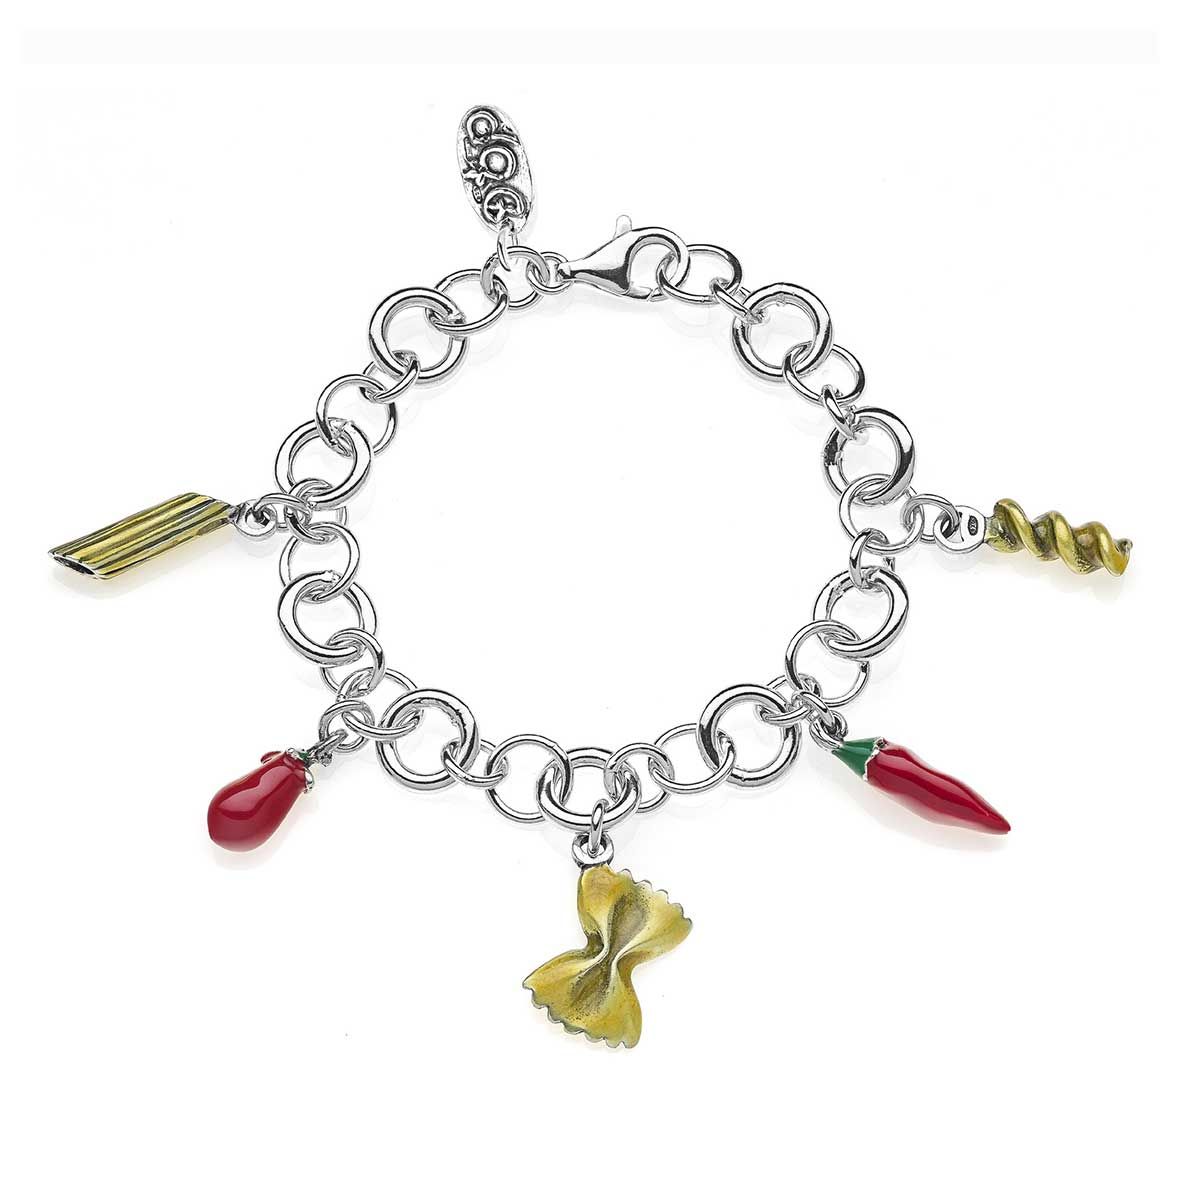 Rolo Luxury Bracelet with Pasta Charms in Sterling Silver and Enamel